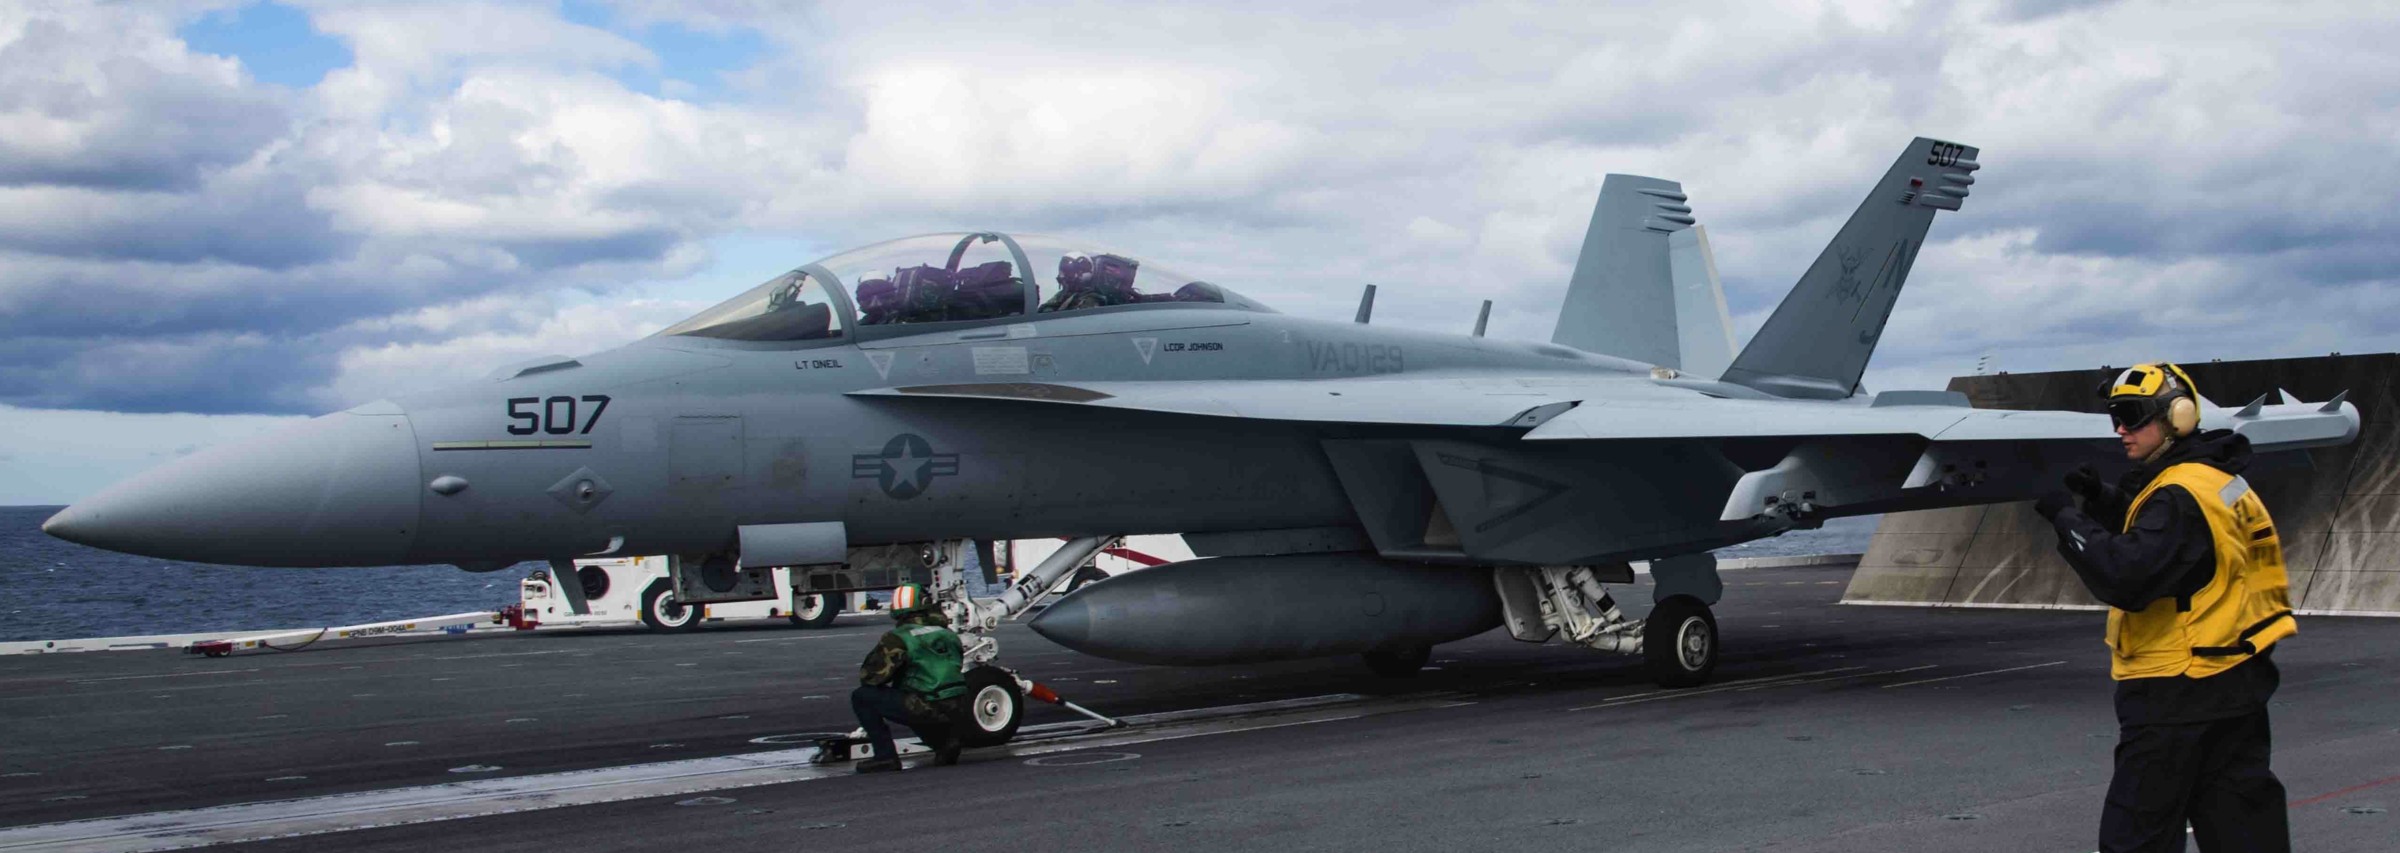 vaq-129 vikings electronic attack squadron fleet replacement frs us navy ea-18g growler 58 uss abraham lincoln cvn-72